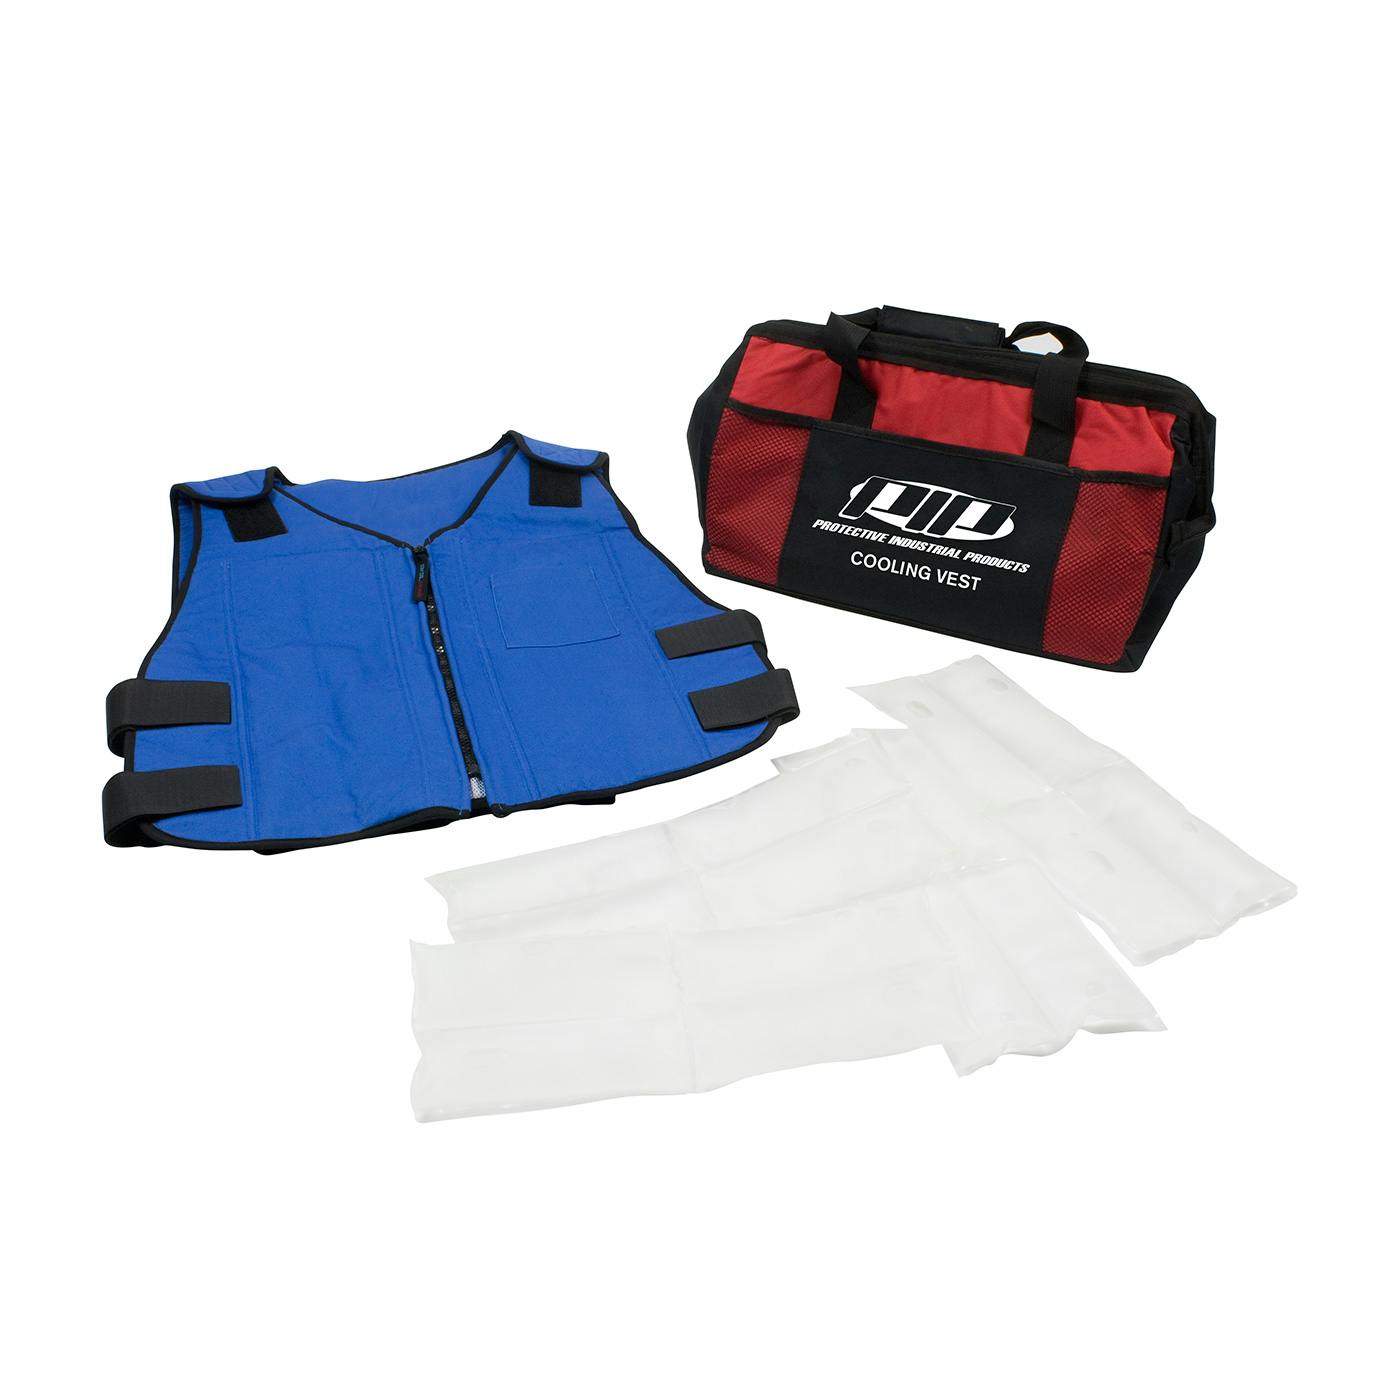 Premium Phase Change Active Fit Cooling Vest with Insulated Cooler Bag, Blue (390-EZSPC)_1